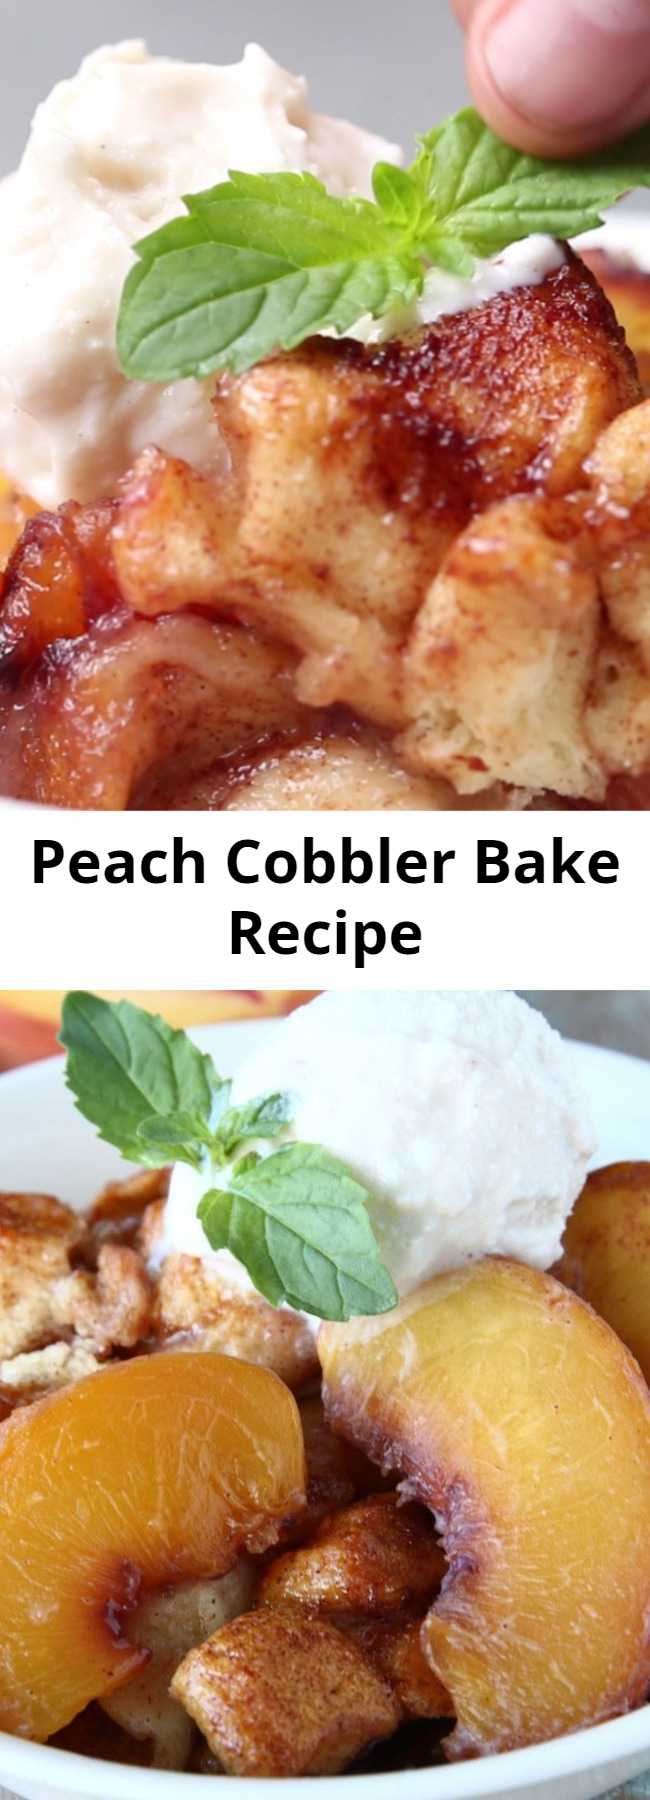 Peach Cobbler Bake Recipe - This Peach Cobbler Cake Is Where Your Taste Buds Need To Be